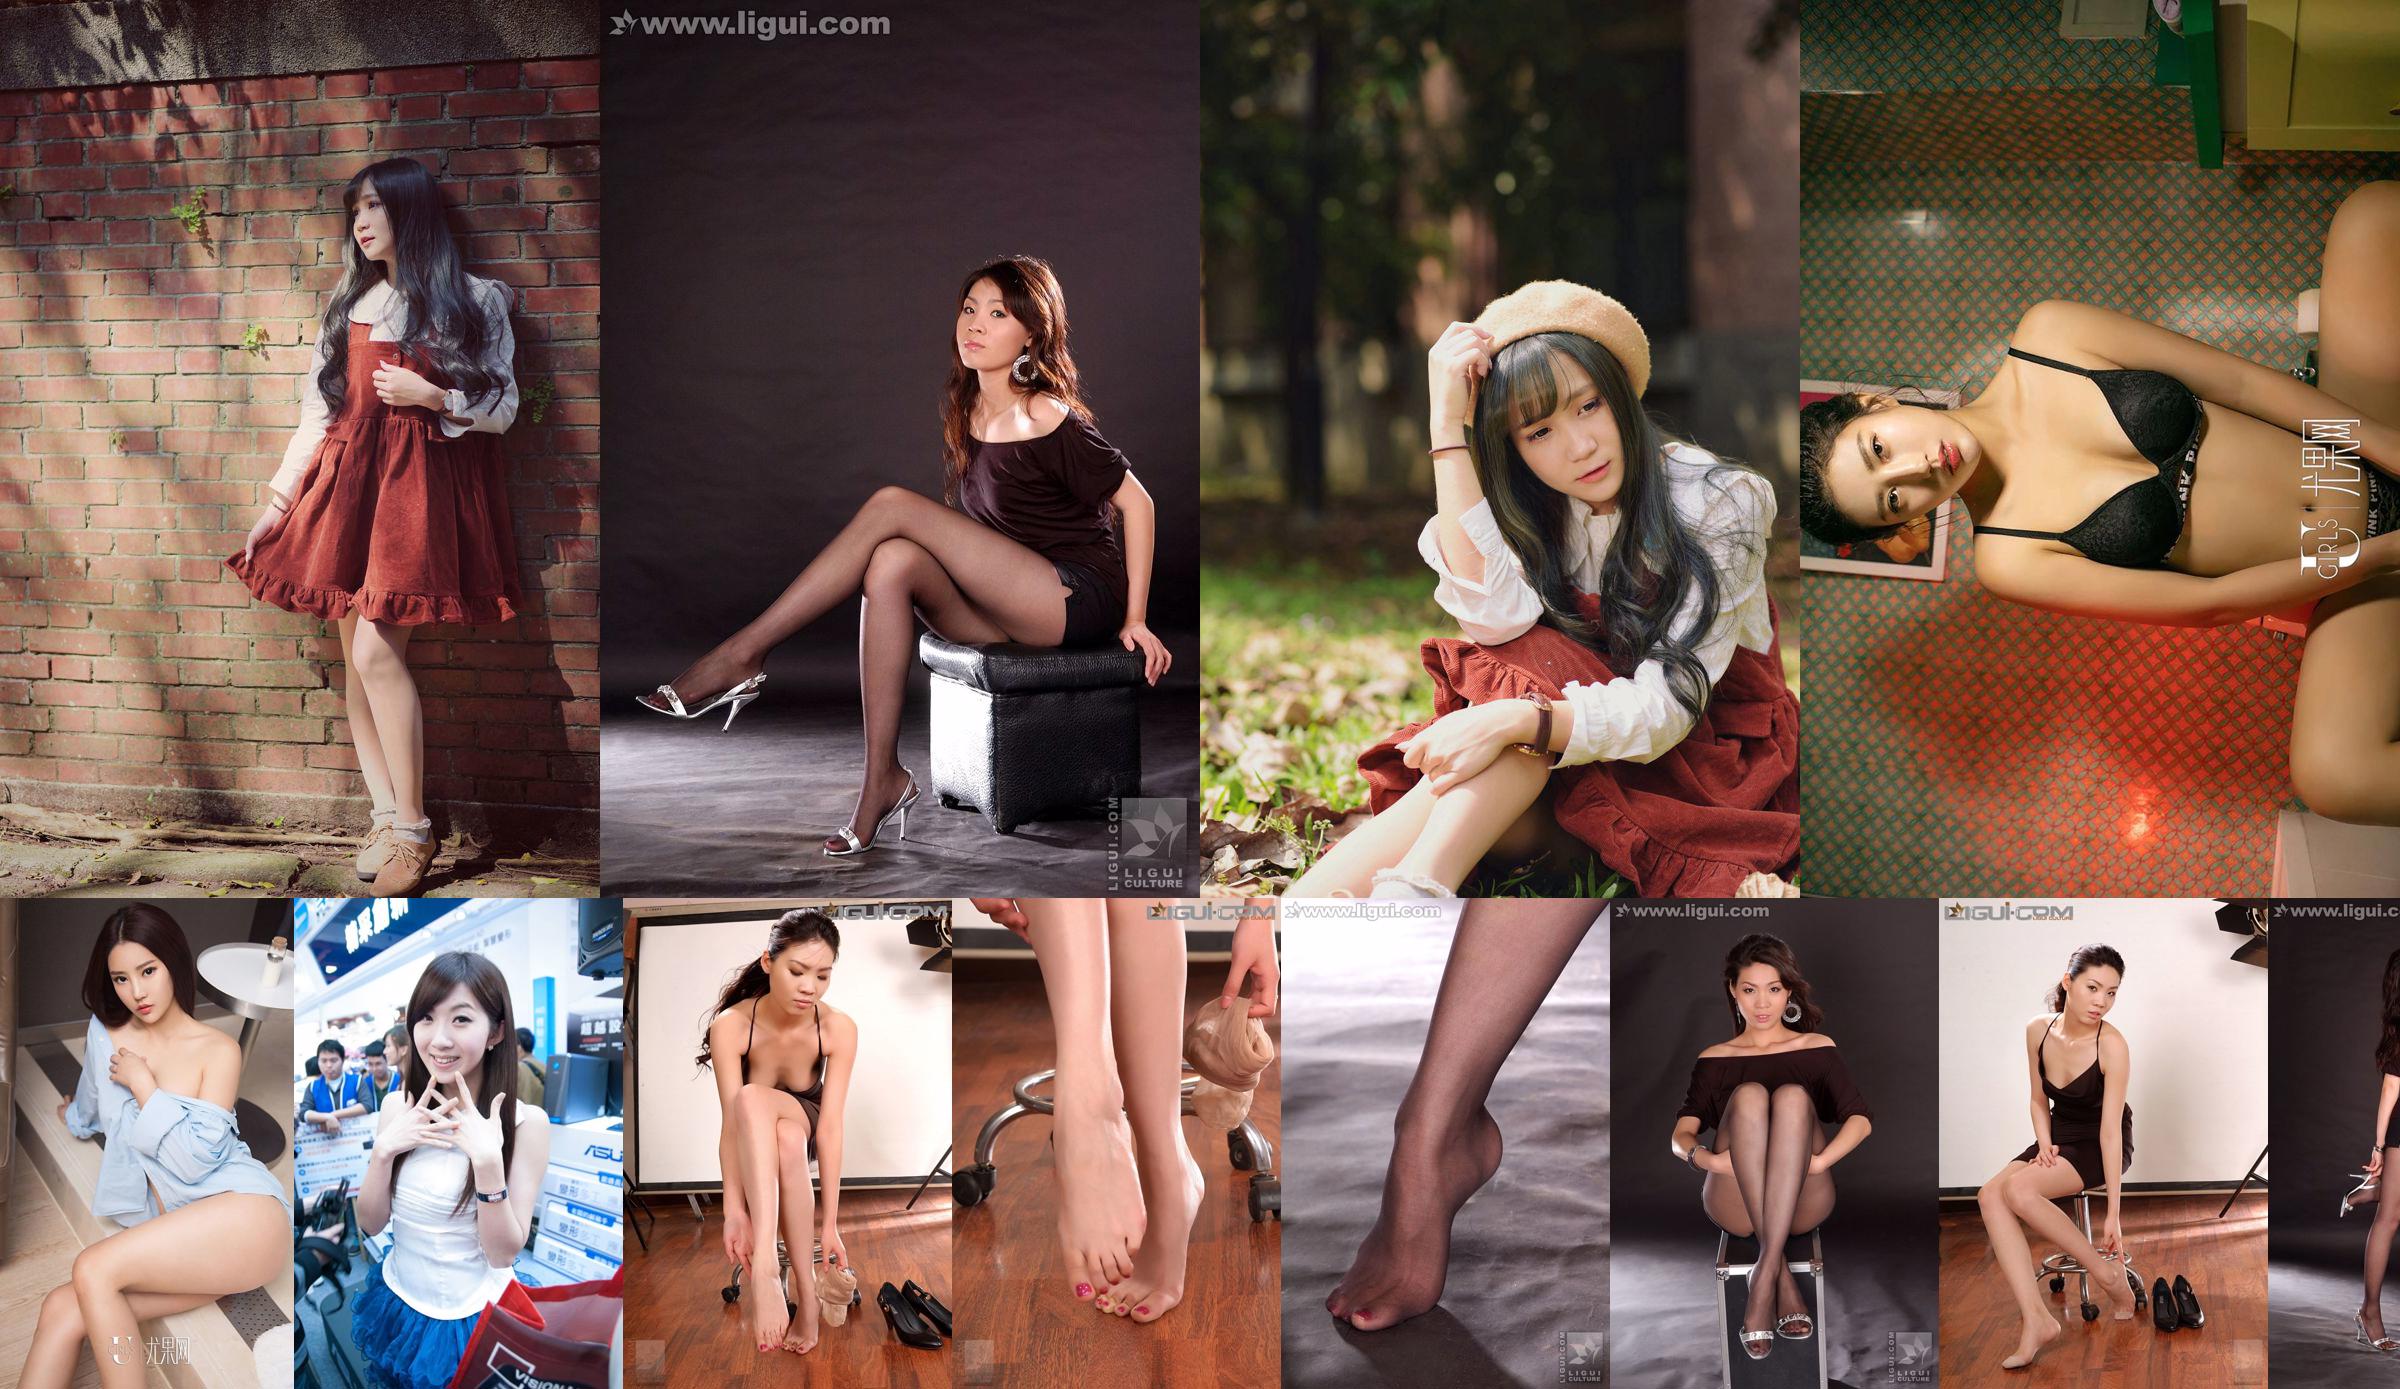 Taiwanese model Een Qi "Electronic Digital Exhibition HD Pictures" -compilatie No.2f625e Pagina 1